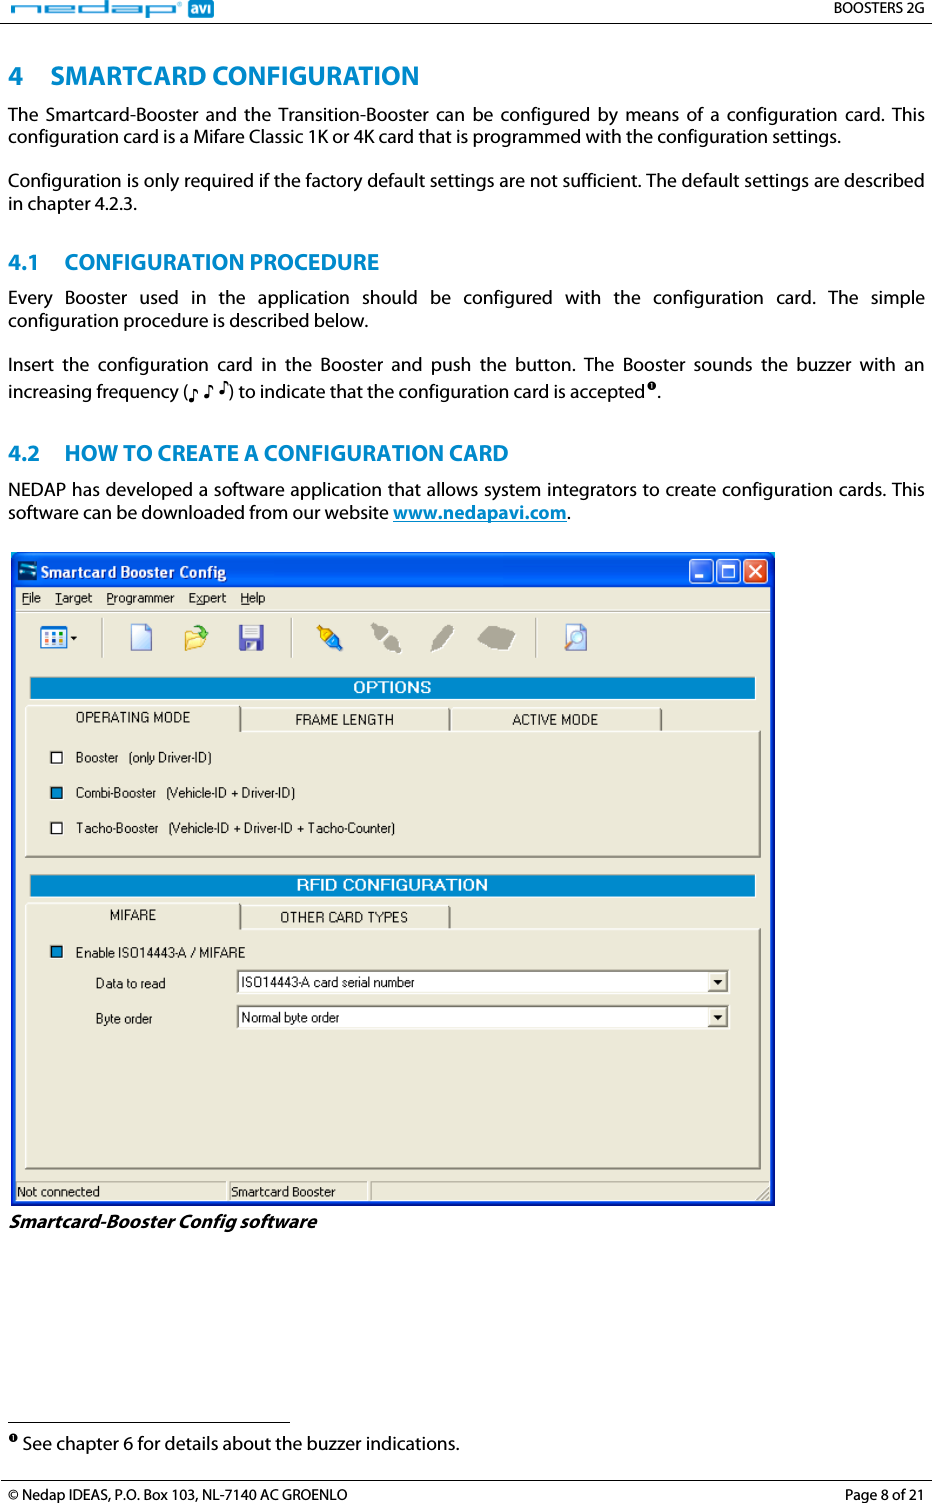   BOOSTERS 2G © Nedap IDEAS, P.O. Box 103, NL-7140 AC GROENLO  Page 8 of 21 4 3BSMARTCARD CONFIGURATION The Smartcard-Booster and the Transition-Booster can be configured by means of a configuration card. This configuration card is a Mifare Classic 1K or 4K card that is programmed with the configuration settings.  Configuration is only required if the factory default settings are not sufficient. The default settings are described in chapter 4.2.3.  4.1 14BCONFIGURATION PROCEDURE Every Booster used in the application should be configured with the configuration card. The simple configuration procedure is described below.  Insert the configuration card in the Booster and push the button. The Booster sounds the buzzer with an increasing frequency (♪ ♪ ♪) to indicate that the configuration card is accepted3TP1FP3T.  4.2 15BHOW TO CREATE A CONFIGURATION CARD NEDAP has developed a software application that allows system integrators to create configuration cards. This software can be downloaded from our website 1TUwww.nedapavi.comU1T.   Smartcard-Booster Config software                                                                         See chapter 6 for details about the buzzer indications.  